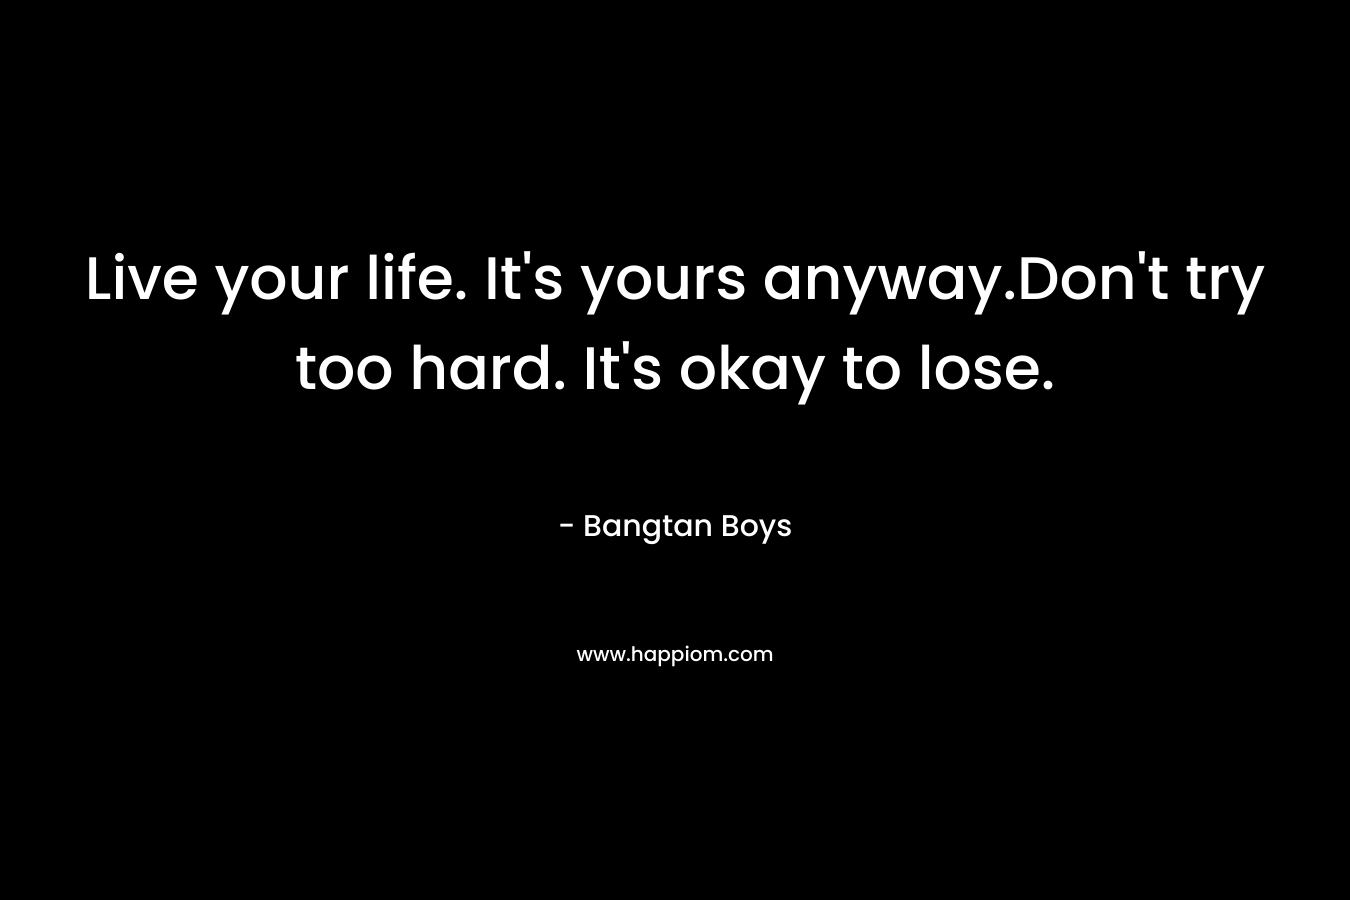 Live your life. It's yours anyway.Don't try too hard. It's okay to lose.